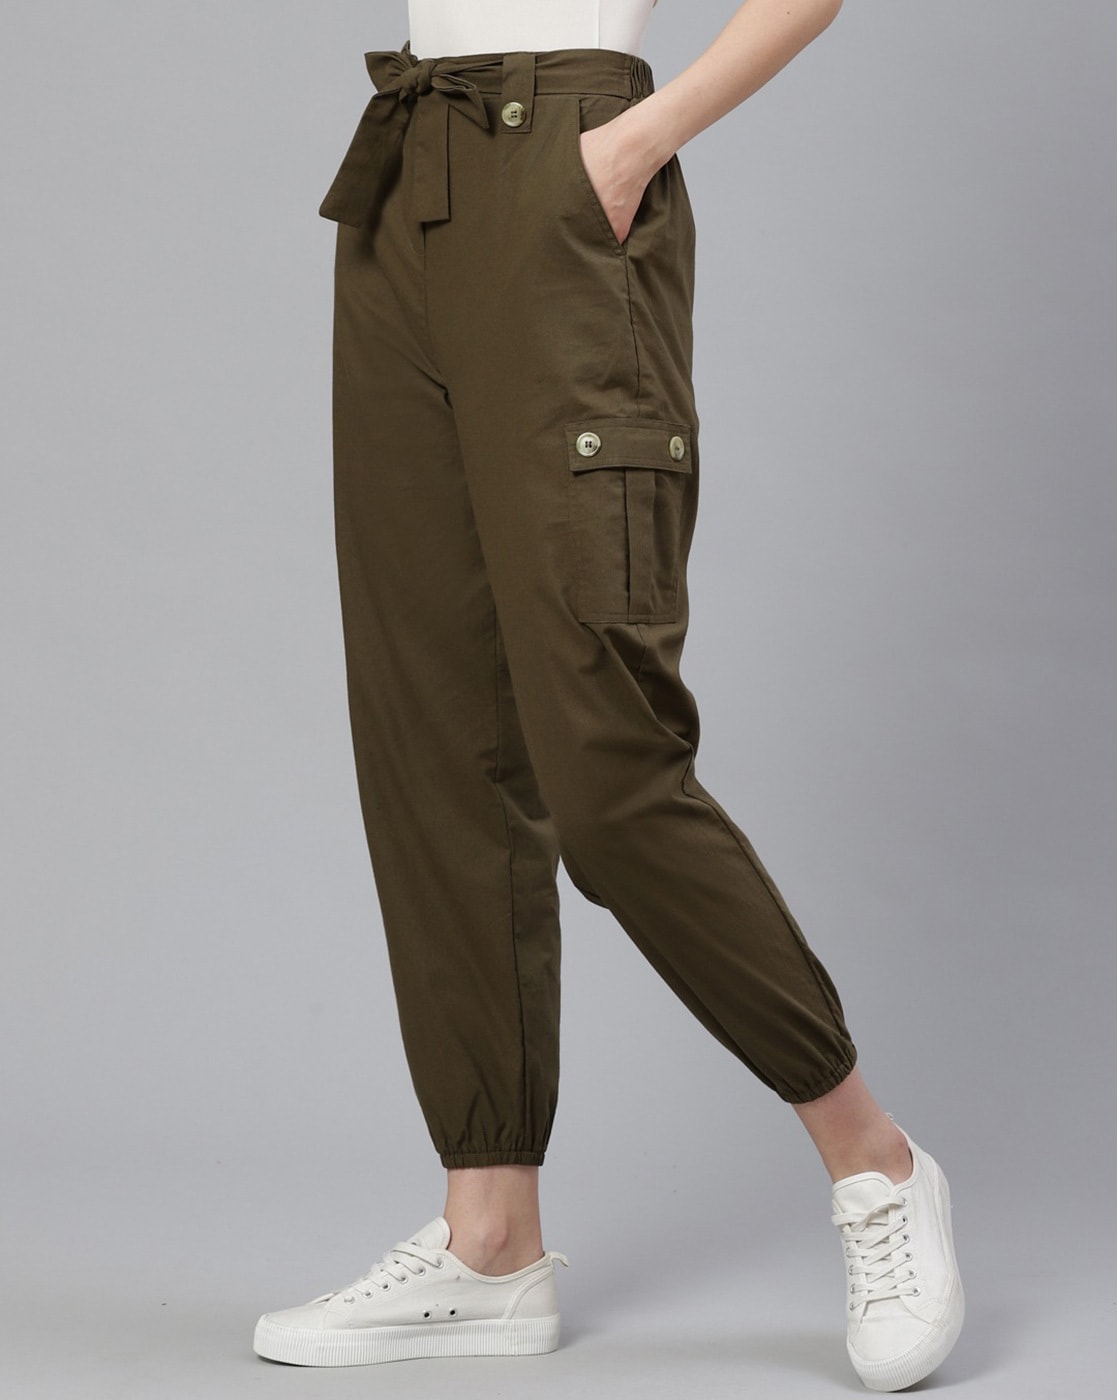 Trendy Cargo Pant For Girls  Women Loose Chain Trousers  Pants